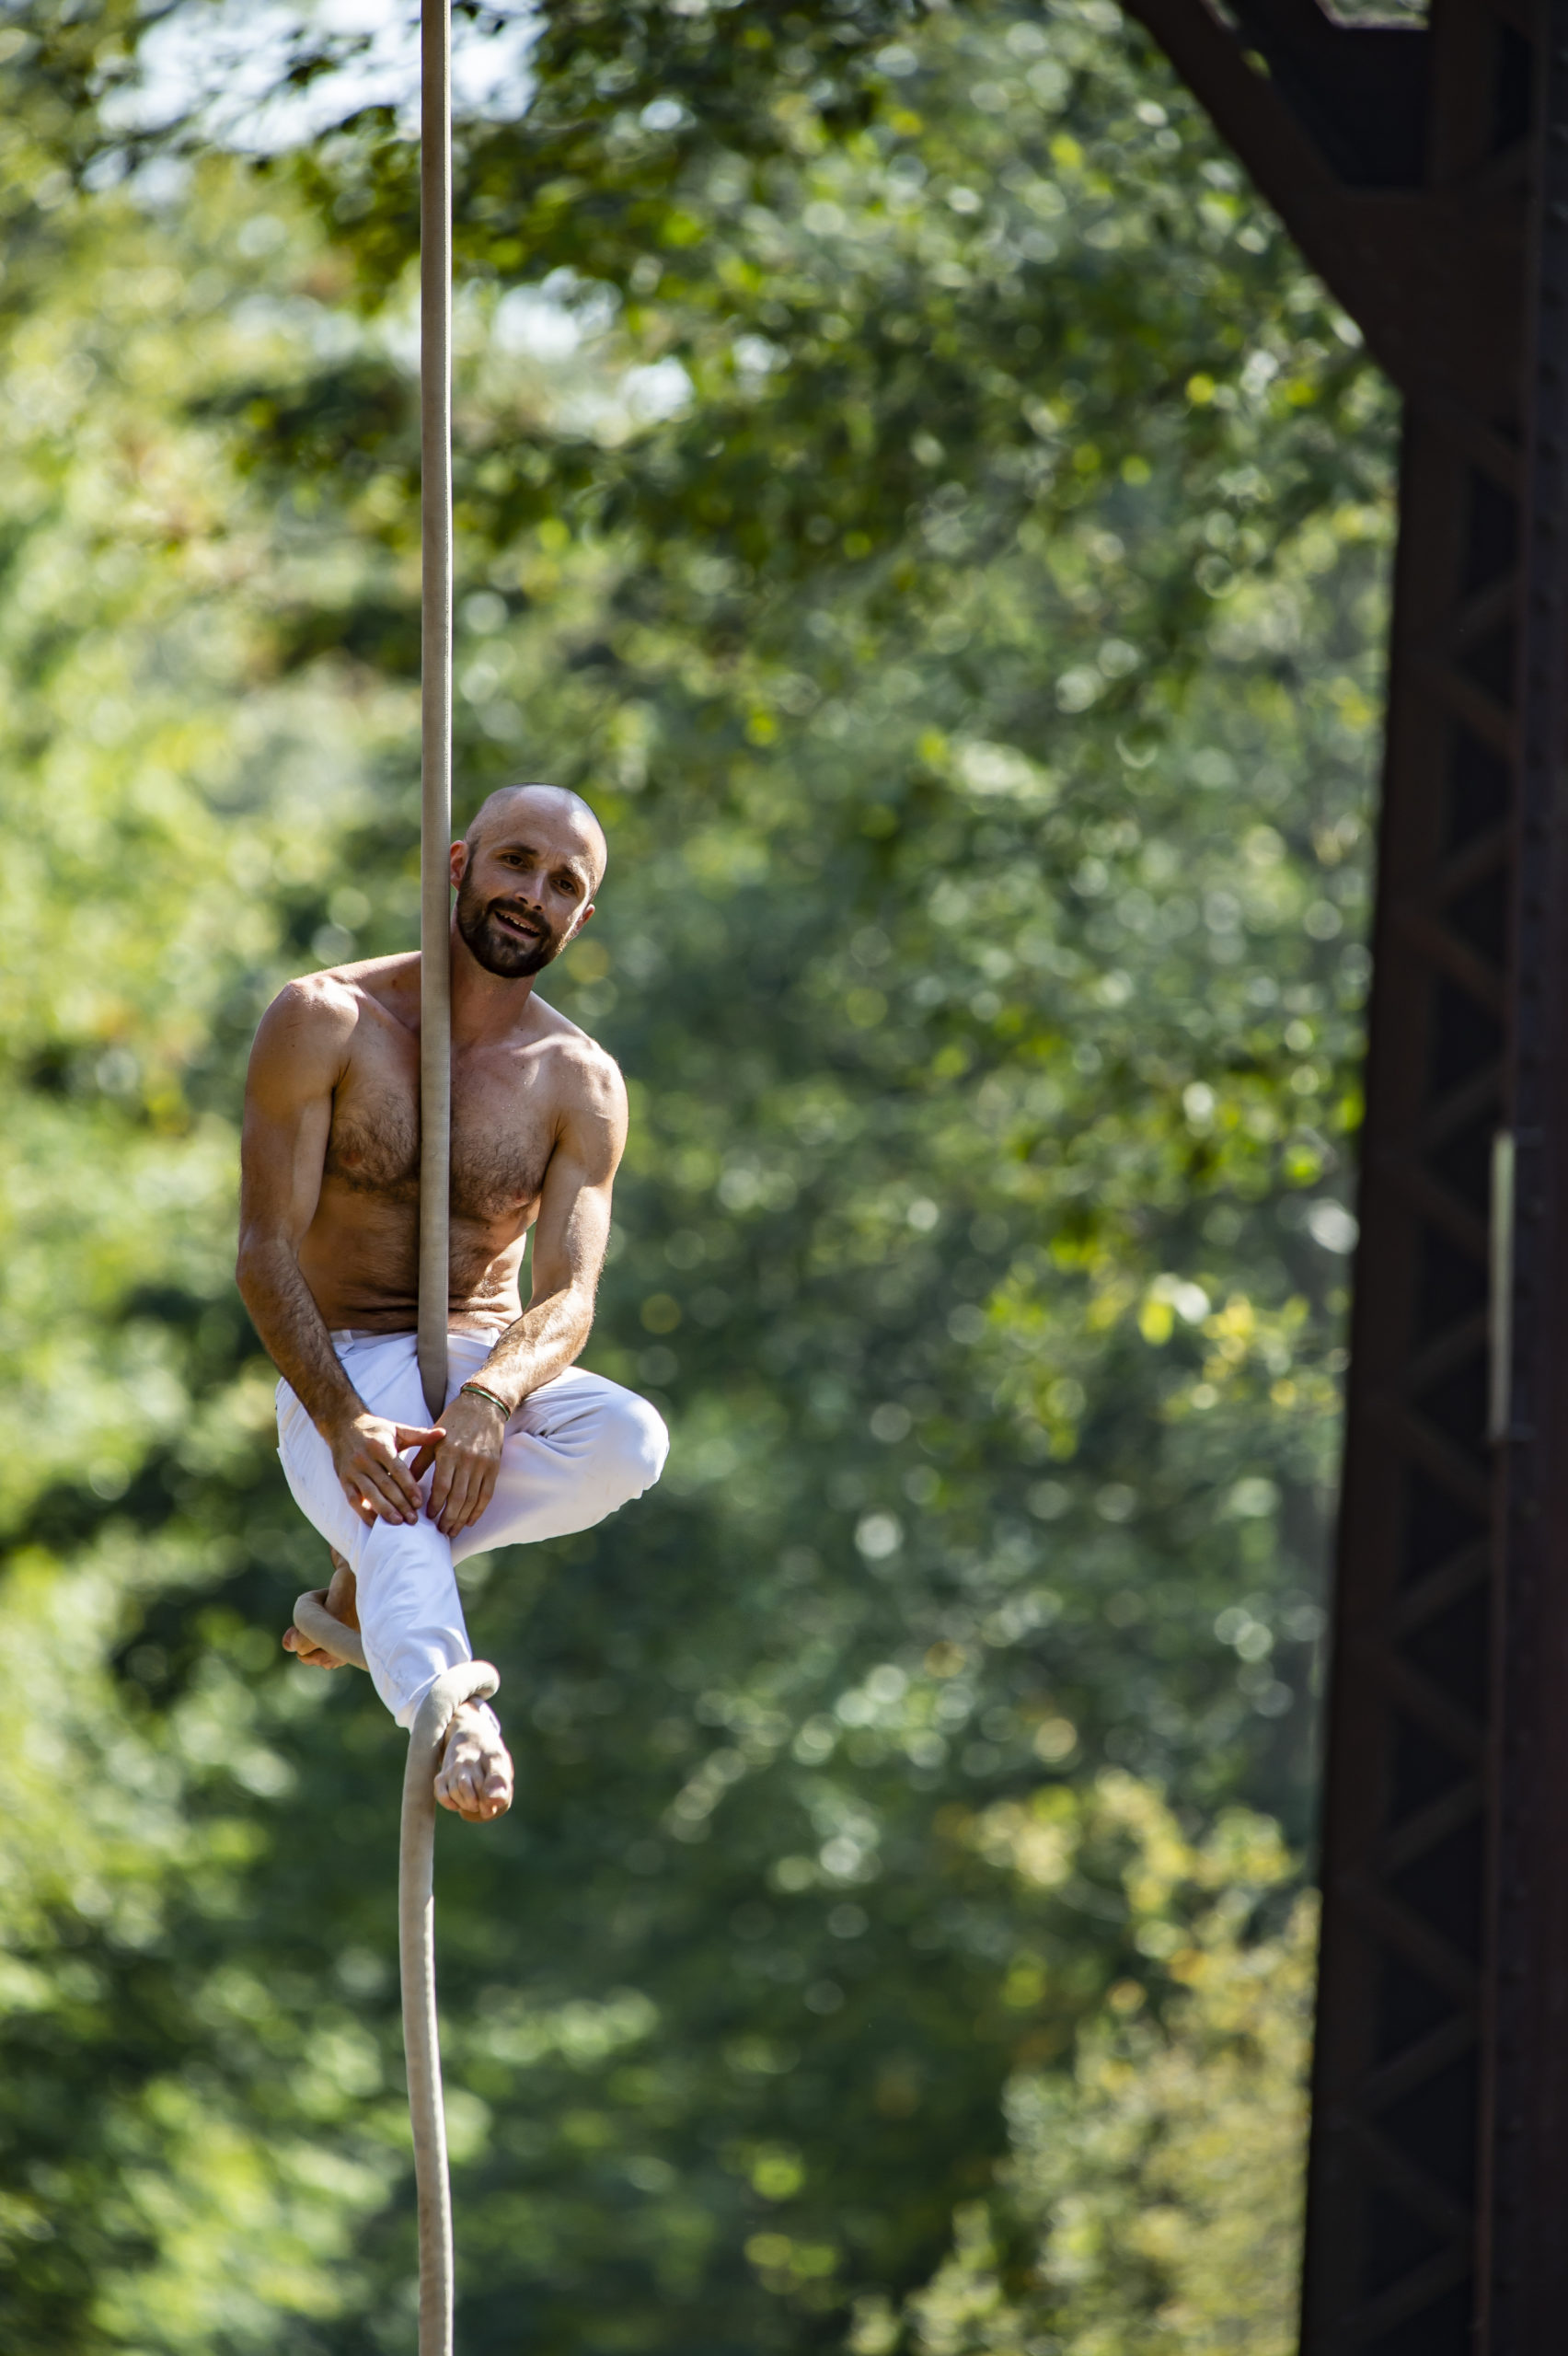 Terry Crane hangs in a relaxed seated position with one leg and one foot wrapped on the vertical rope